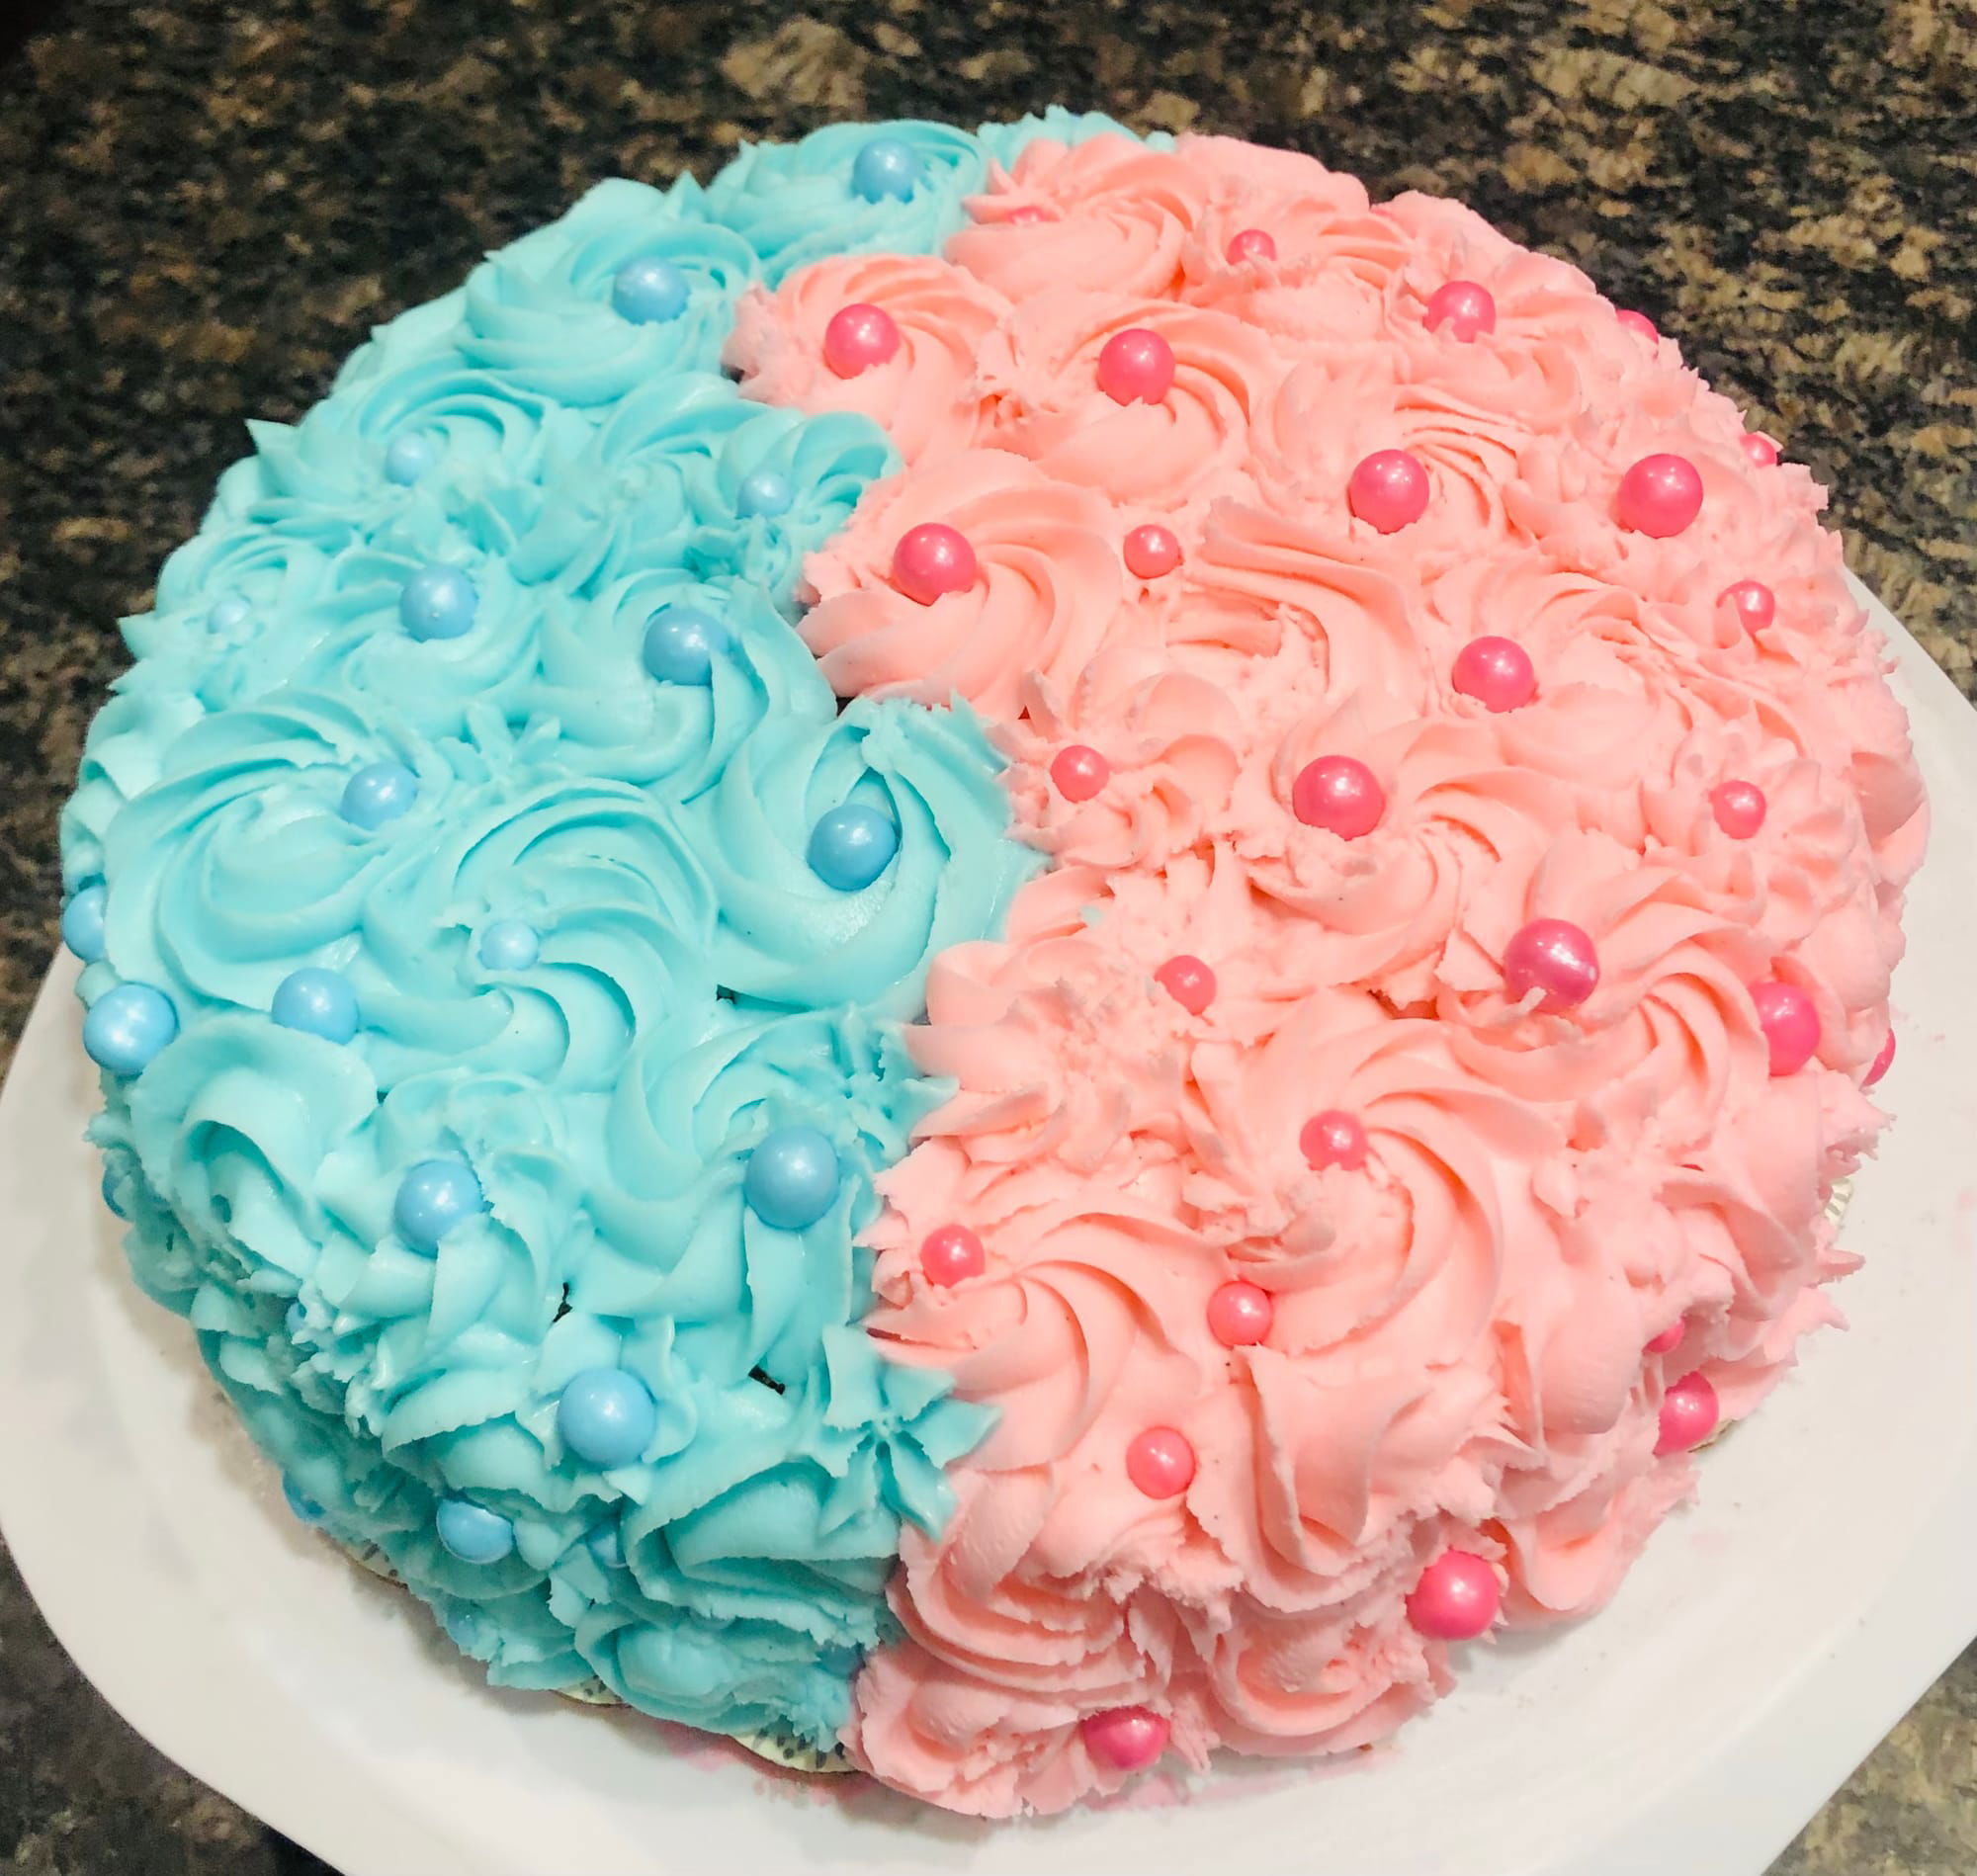 2 Layer Vanilla Gender Reveal Cake With Buttercream Frosting